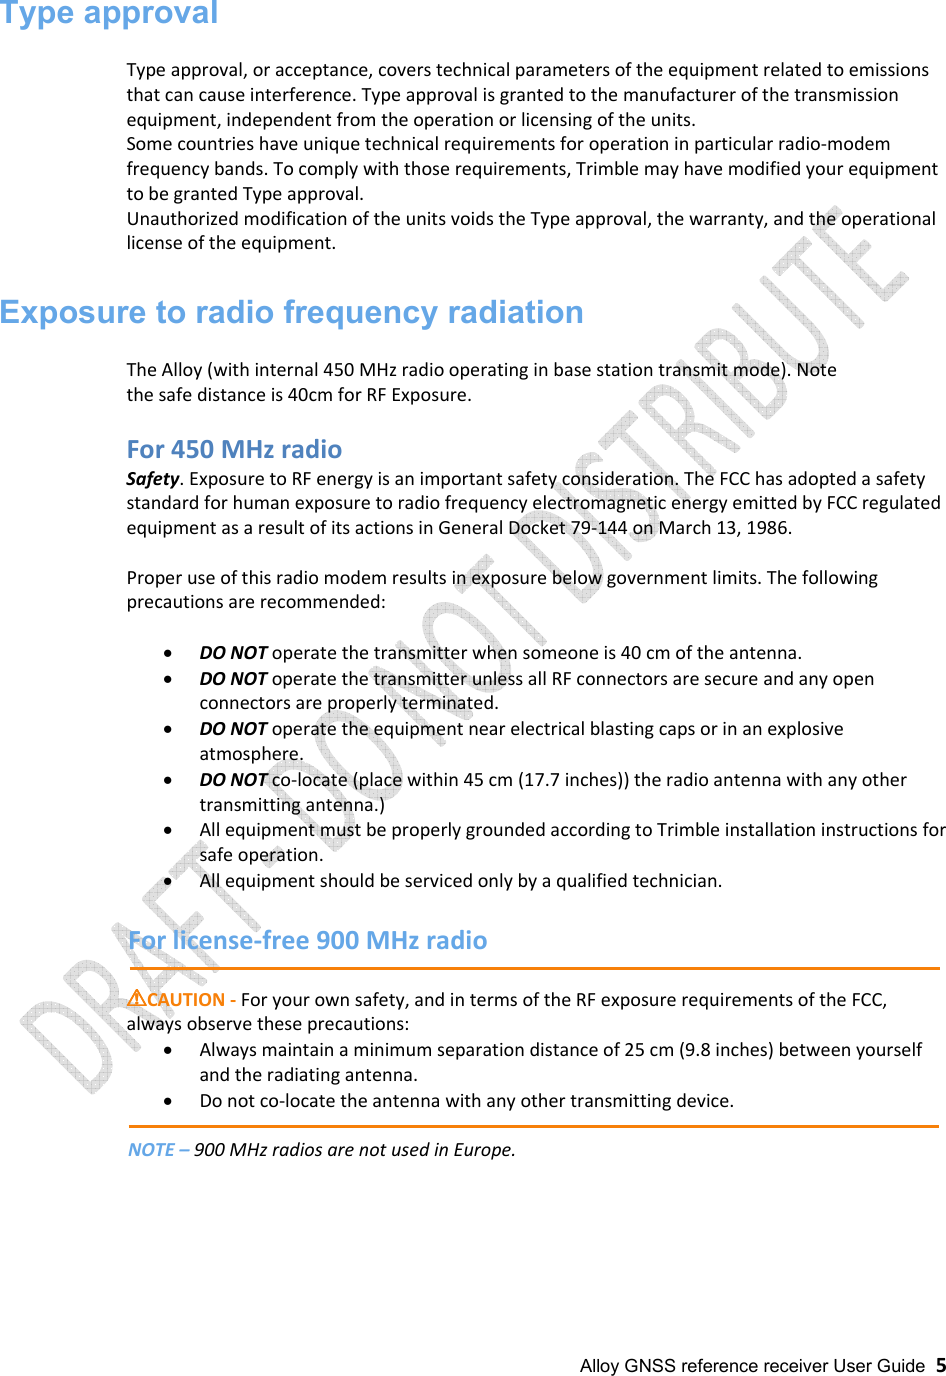 Alloy GNSS reference receiver User Guide  5 Type approval Type approval, or acceptance, covers technical parameters of the equipment related to emissions that can cause interference. Type approval is granted to the manufacturer of the transmission equipment, independent from the operation or licensing of the units. Some countries have unique technical requirements for operation in particular radio-modem frequency bands. To comply with those requirements, Trimble may have modified your equipment to be granted Type approval.  Unauthorized modification of the units voids the Type approval, the warranty, and the operational license of the equipment. Exposure to radio frequency radiation The Alloy (with internal 450 MHz radio operating in base station transmit mode). Note the safe distance is 40cm for RF Exposure.For 450 MHz radio Safety. Exposure to RF energy is an important safety consideration. The FCC has adopted a safety standard for human exposure to radio frequency electromagnetic energy emitted by FCC regulated equipment as a result of its actions in General Docket 79-144 on March 13, 1986. Proper use of this radio modem results in exposure below government limits. The following precautions are recommended: •DO NOT operate the transmitter when someone is 40 cm of the antenna.•DO NOT operate the transmitter unless all RF connectors are secure and any openconnectors are properly terminated.•DO NOT operate the equipment near electrical blasting caps or in an explosiveatmosphere.•DO NOT co-locate (place within 45 cm (17.7 inches)) the radio antenna with any other transmitting antenna.)•All equipment must be properly grounded according to Trimble installation instructions forsafe operation.•All equipment should be serviced only by a qualified technician.For license-free 900 MHz radio !!!!CAUTION - For your own safety, and in terms of the RF exposure requirements of the FCC, always observe these precautions: •Always maintain a minimum separation distance of 25 cm (9.8 inches) between yourselfand the radiating antenna.•Do not co-locate the antenna with any other transmitting device.NOTE – 900 MHz radios are not used in Europe. 